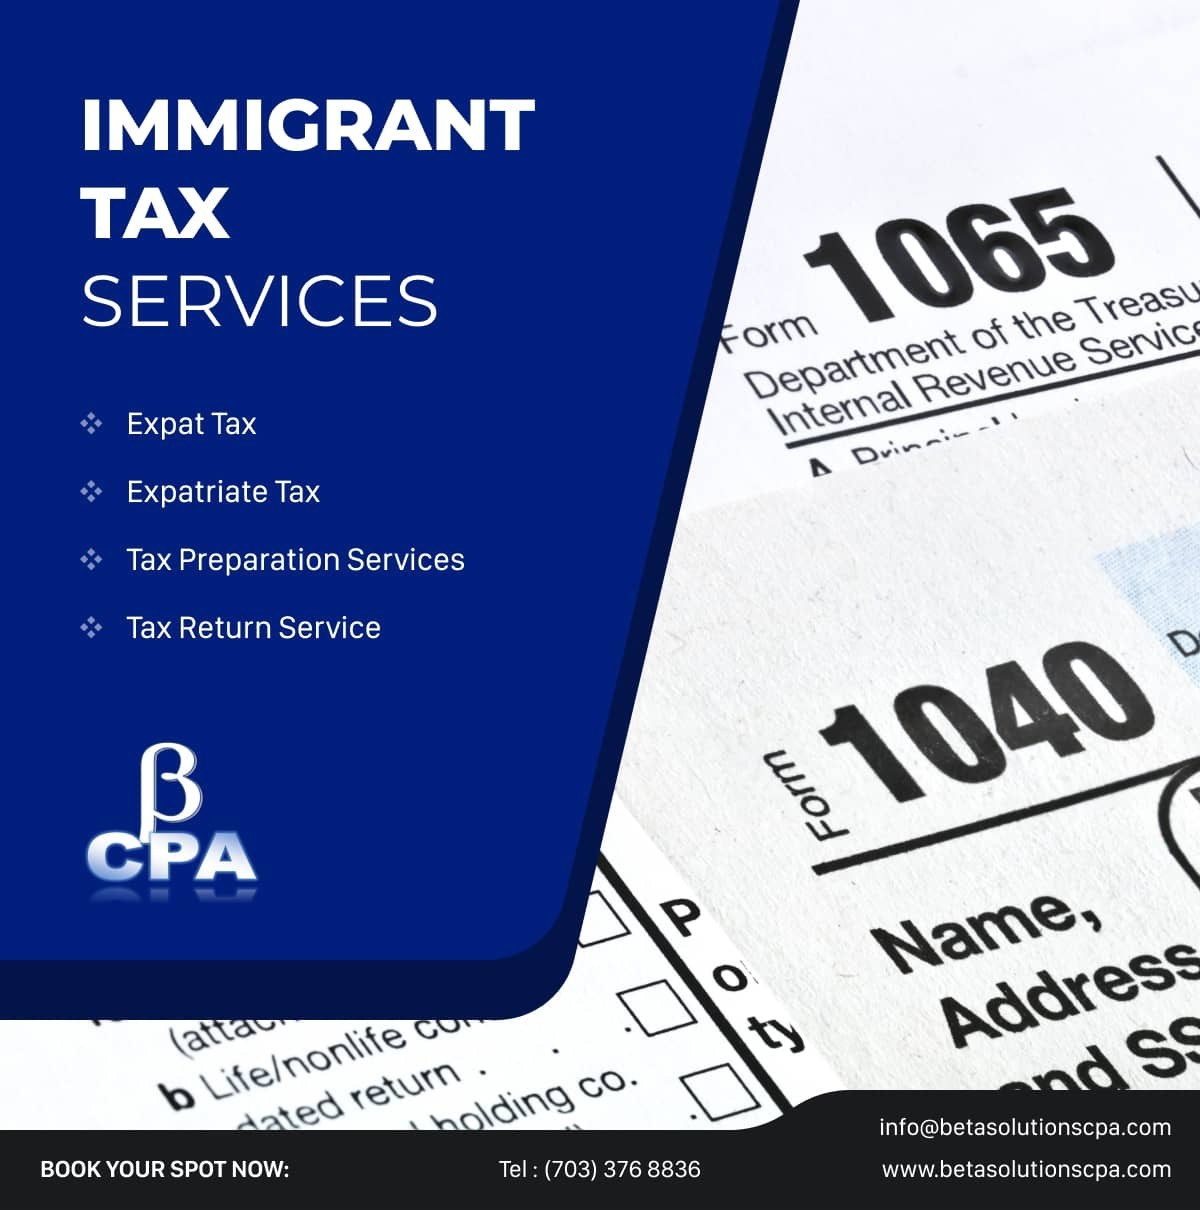 Tax Return Service and Tax Preparation Services from Beta Solutions CPA